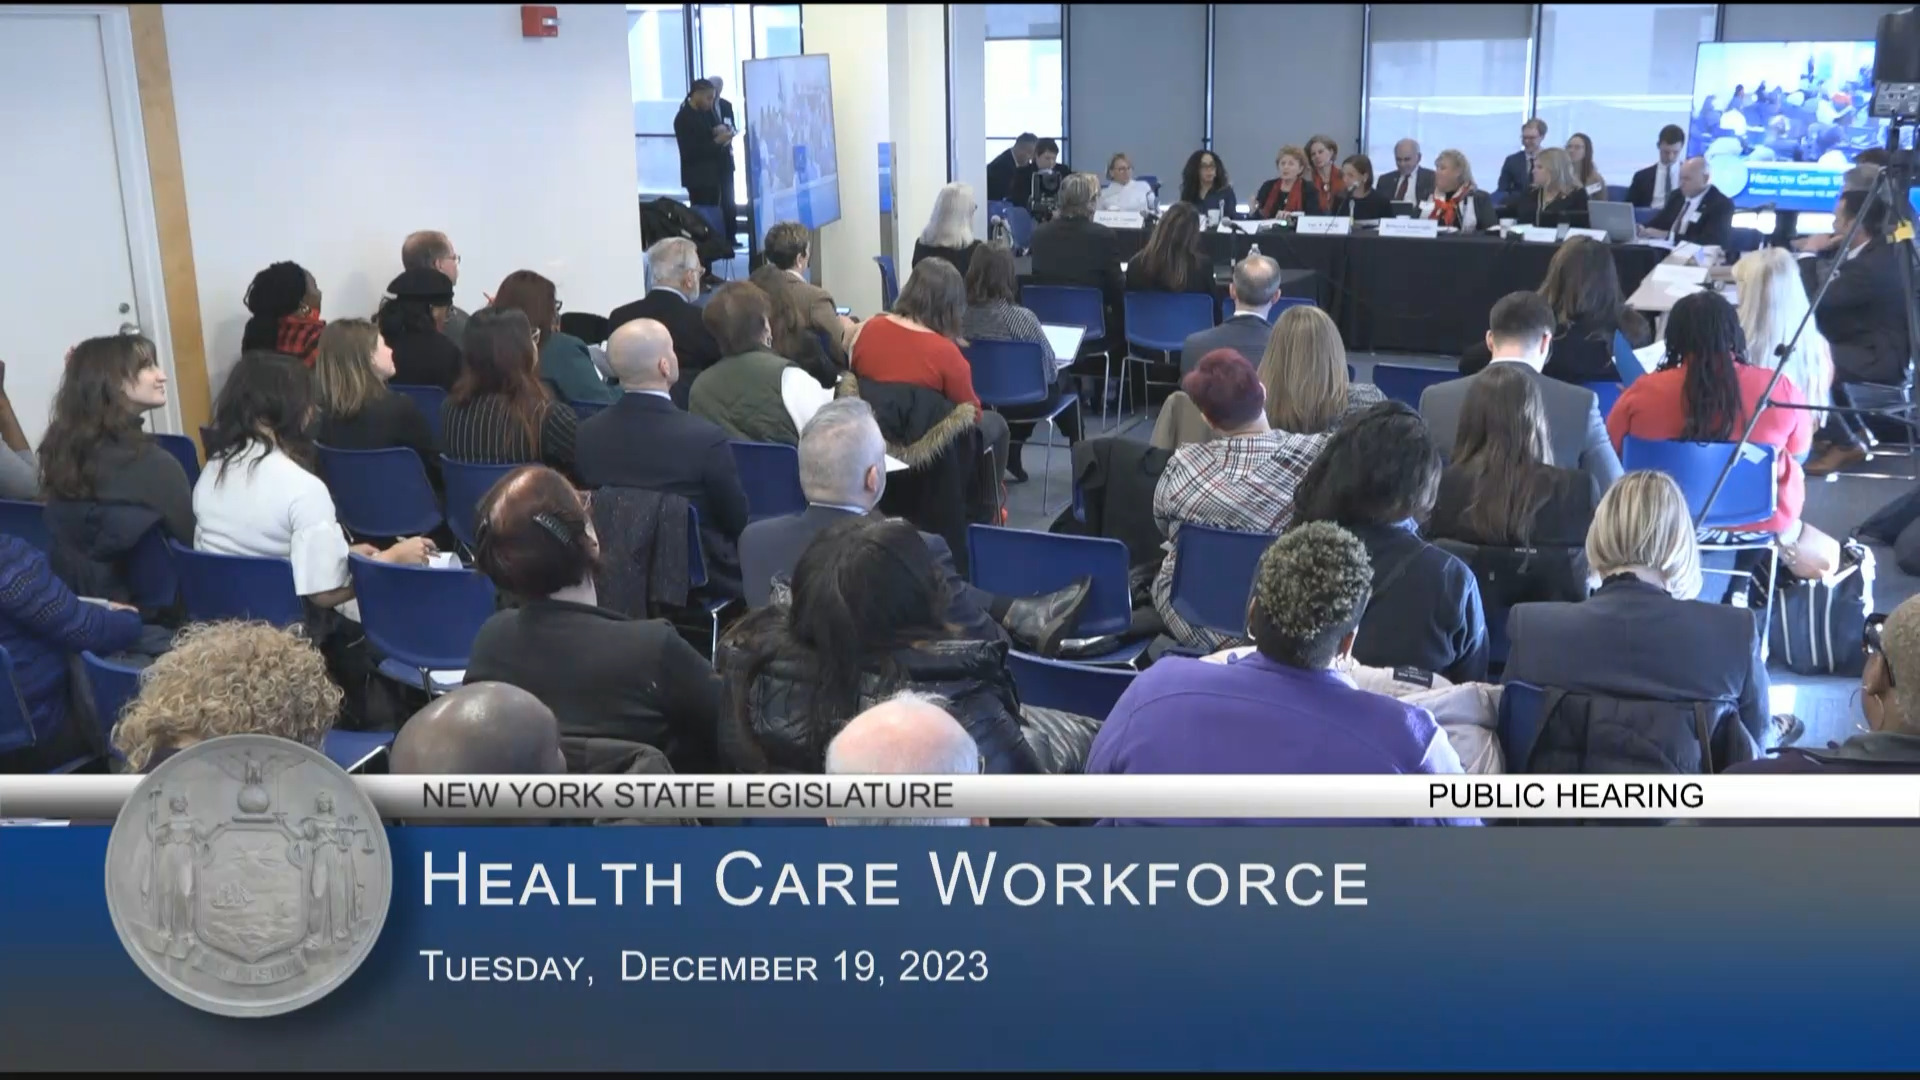 Healthcare Association Leaders Testify at Public Hearing on Status of the Health Care Workforce in New York State